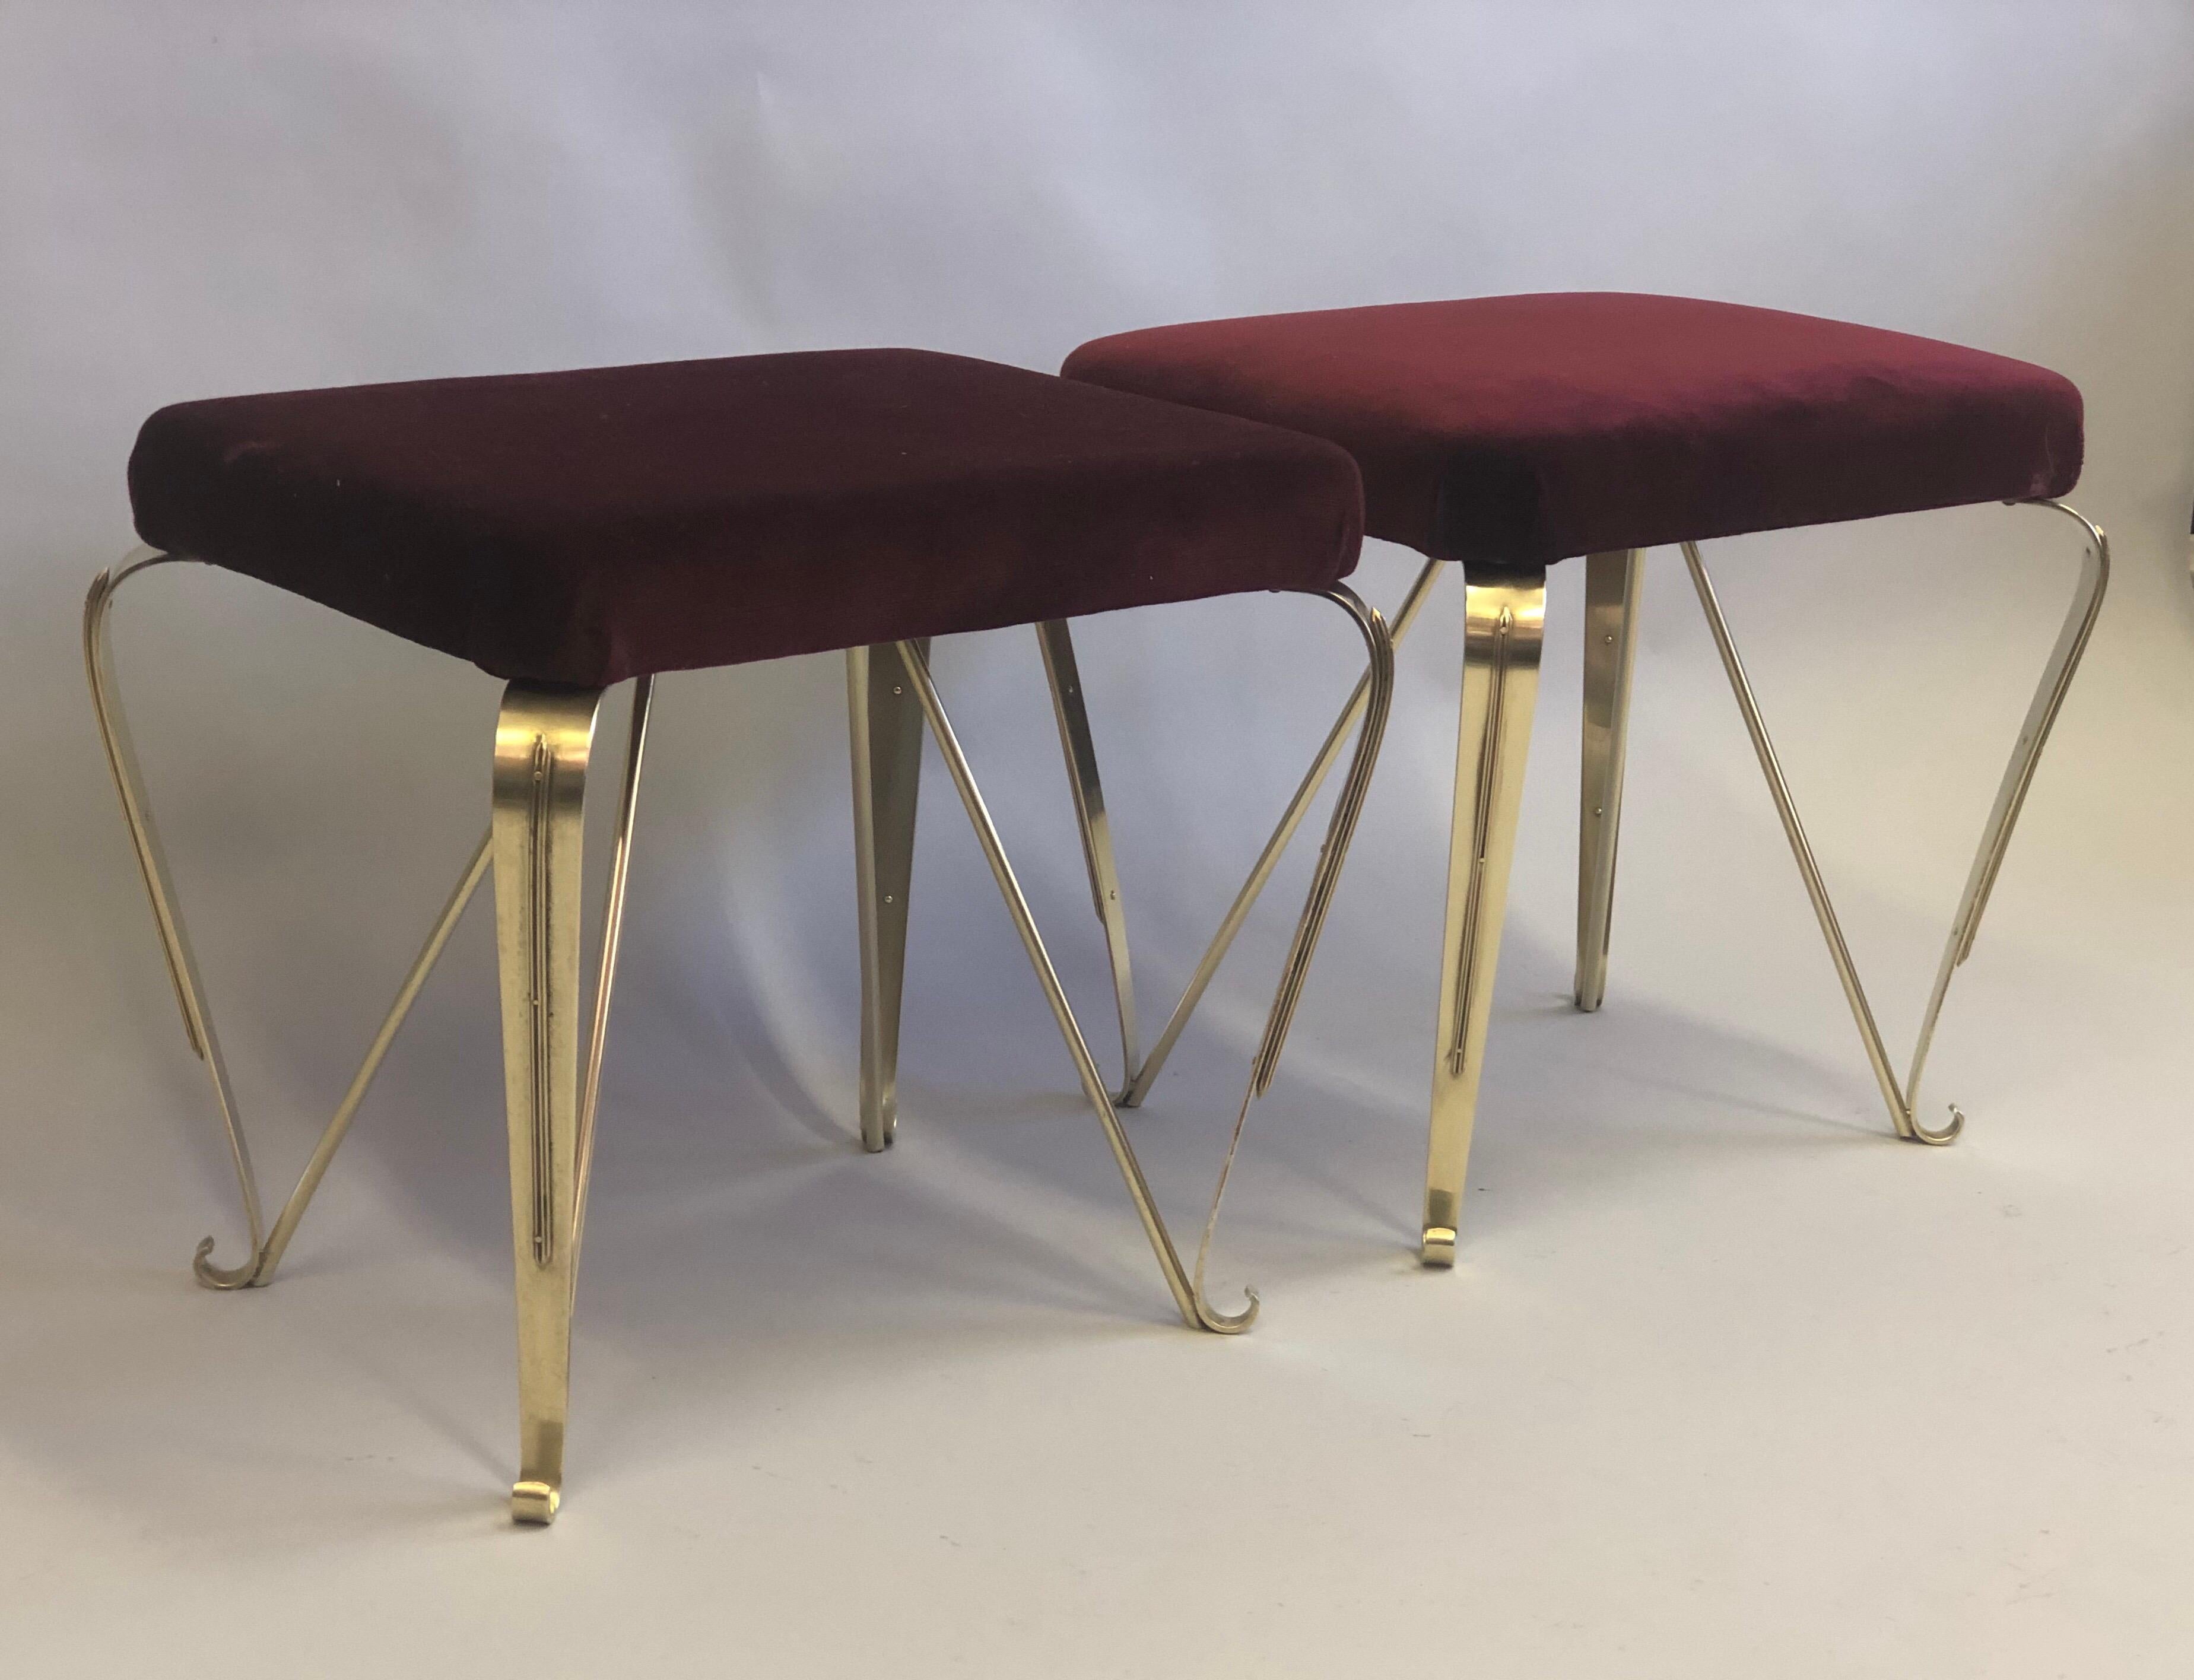 Faceted Pair of Italian Mid-Century Modern Neoclassical Solid Brass Benches by Jansen For Sale